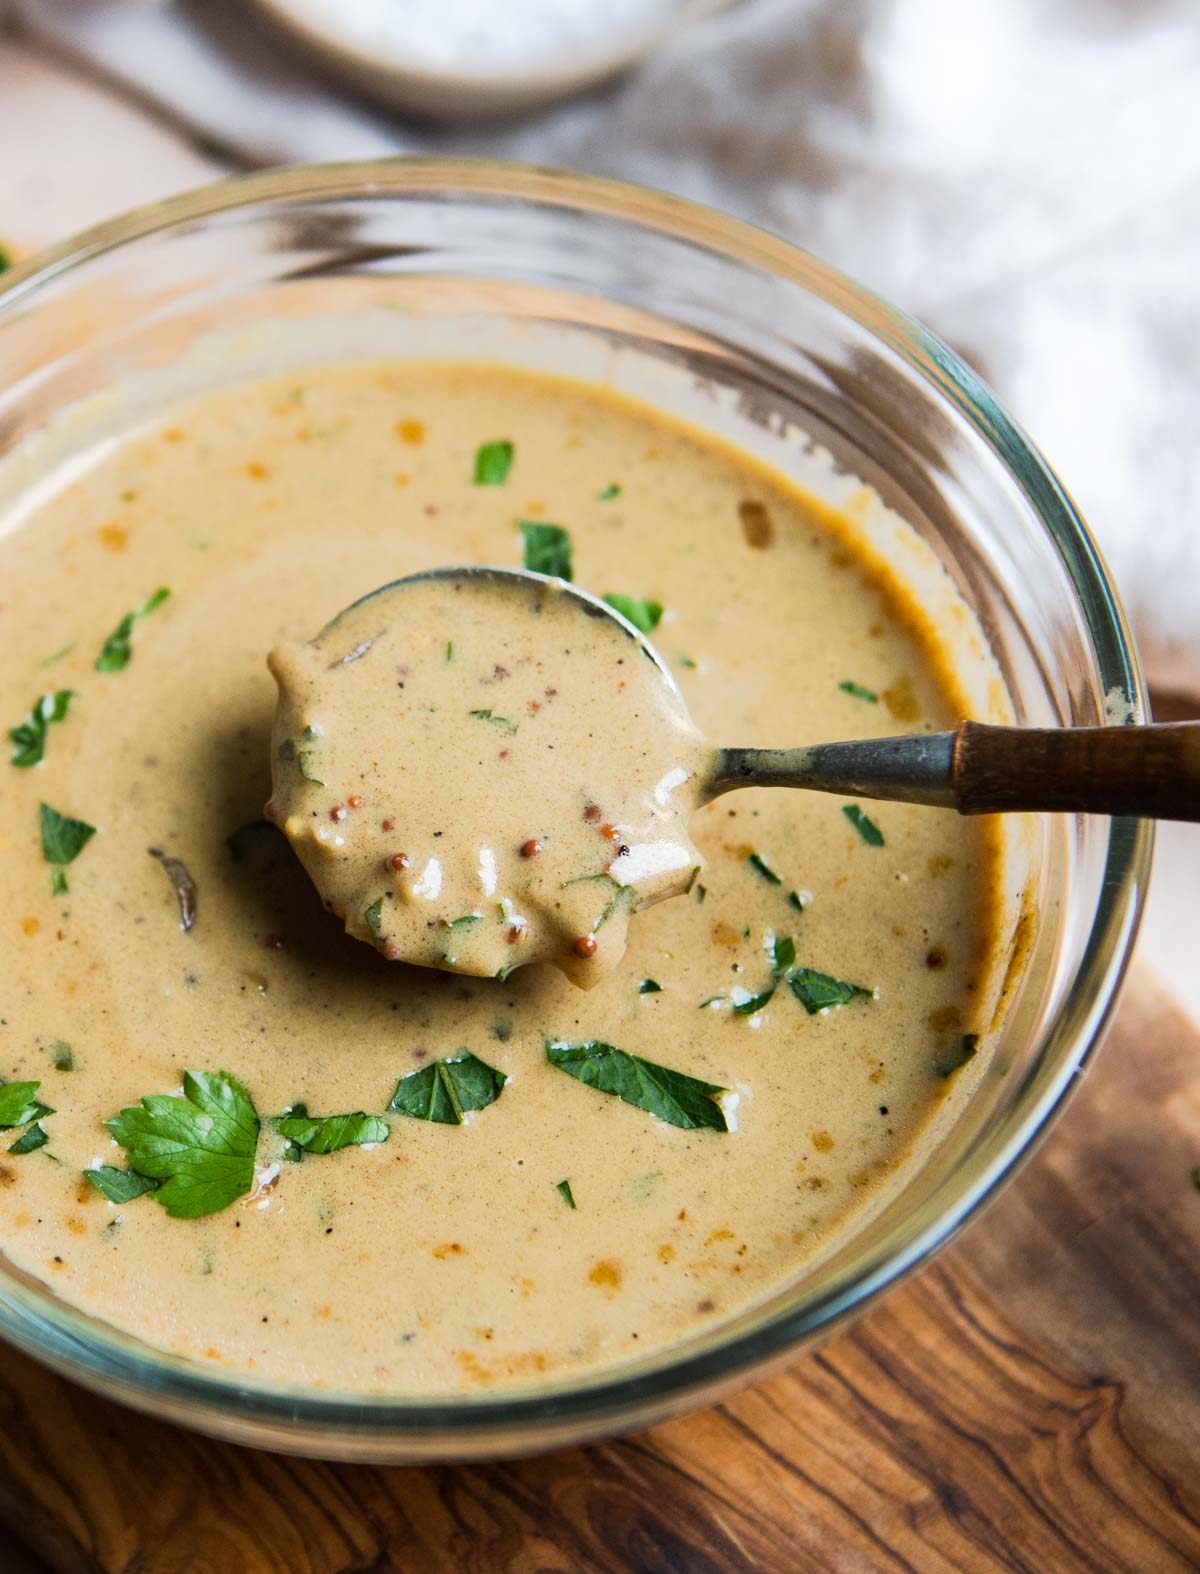 mustard sauce in a clear glass serving bowl on a wood board